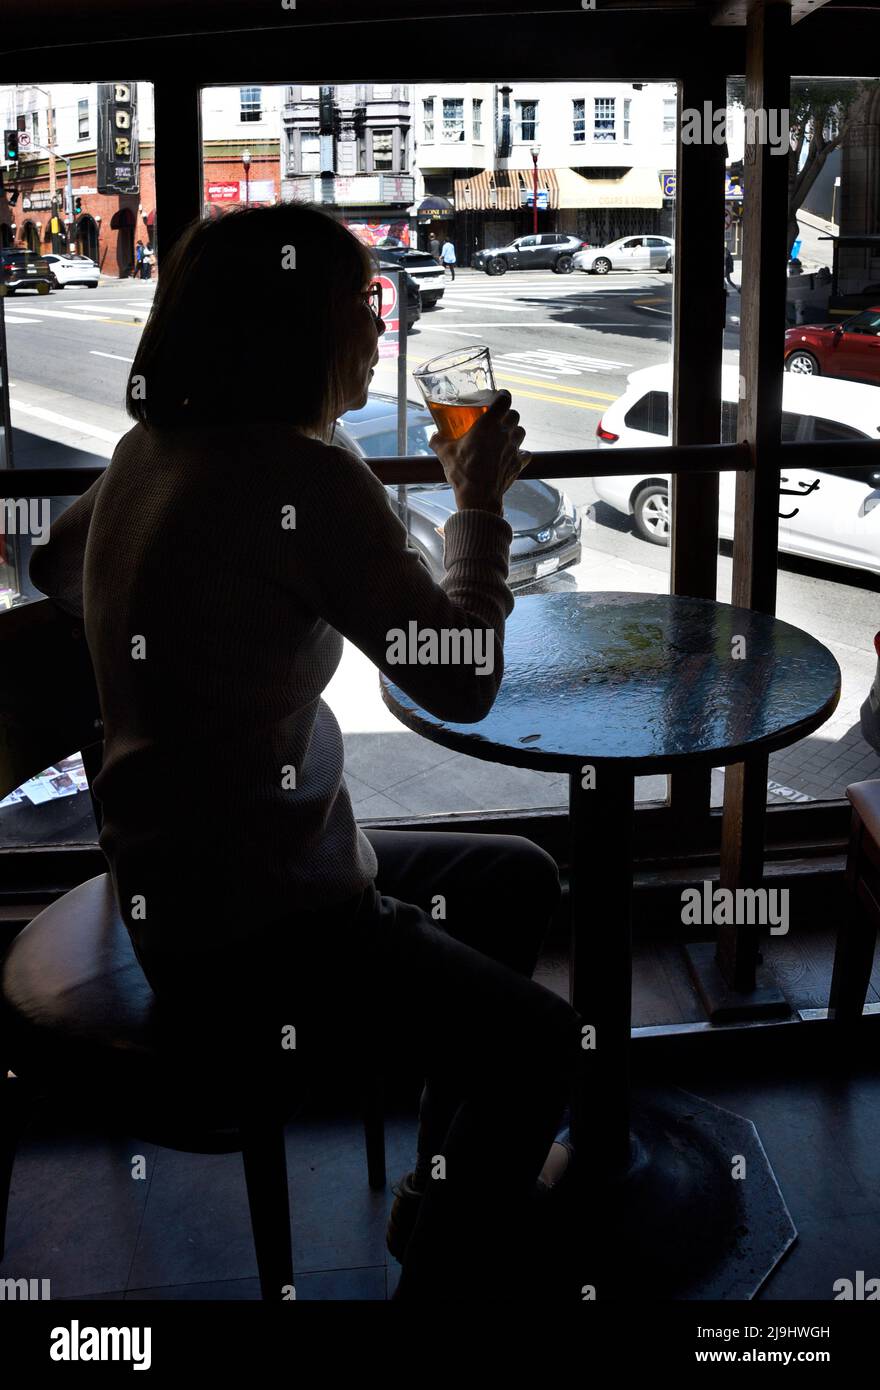 A woman enjoys a beer at the Vesuvio Cafe, a landmark American bar in the North Beach section of San Francisco, California. Stock Photo